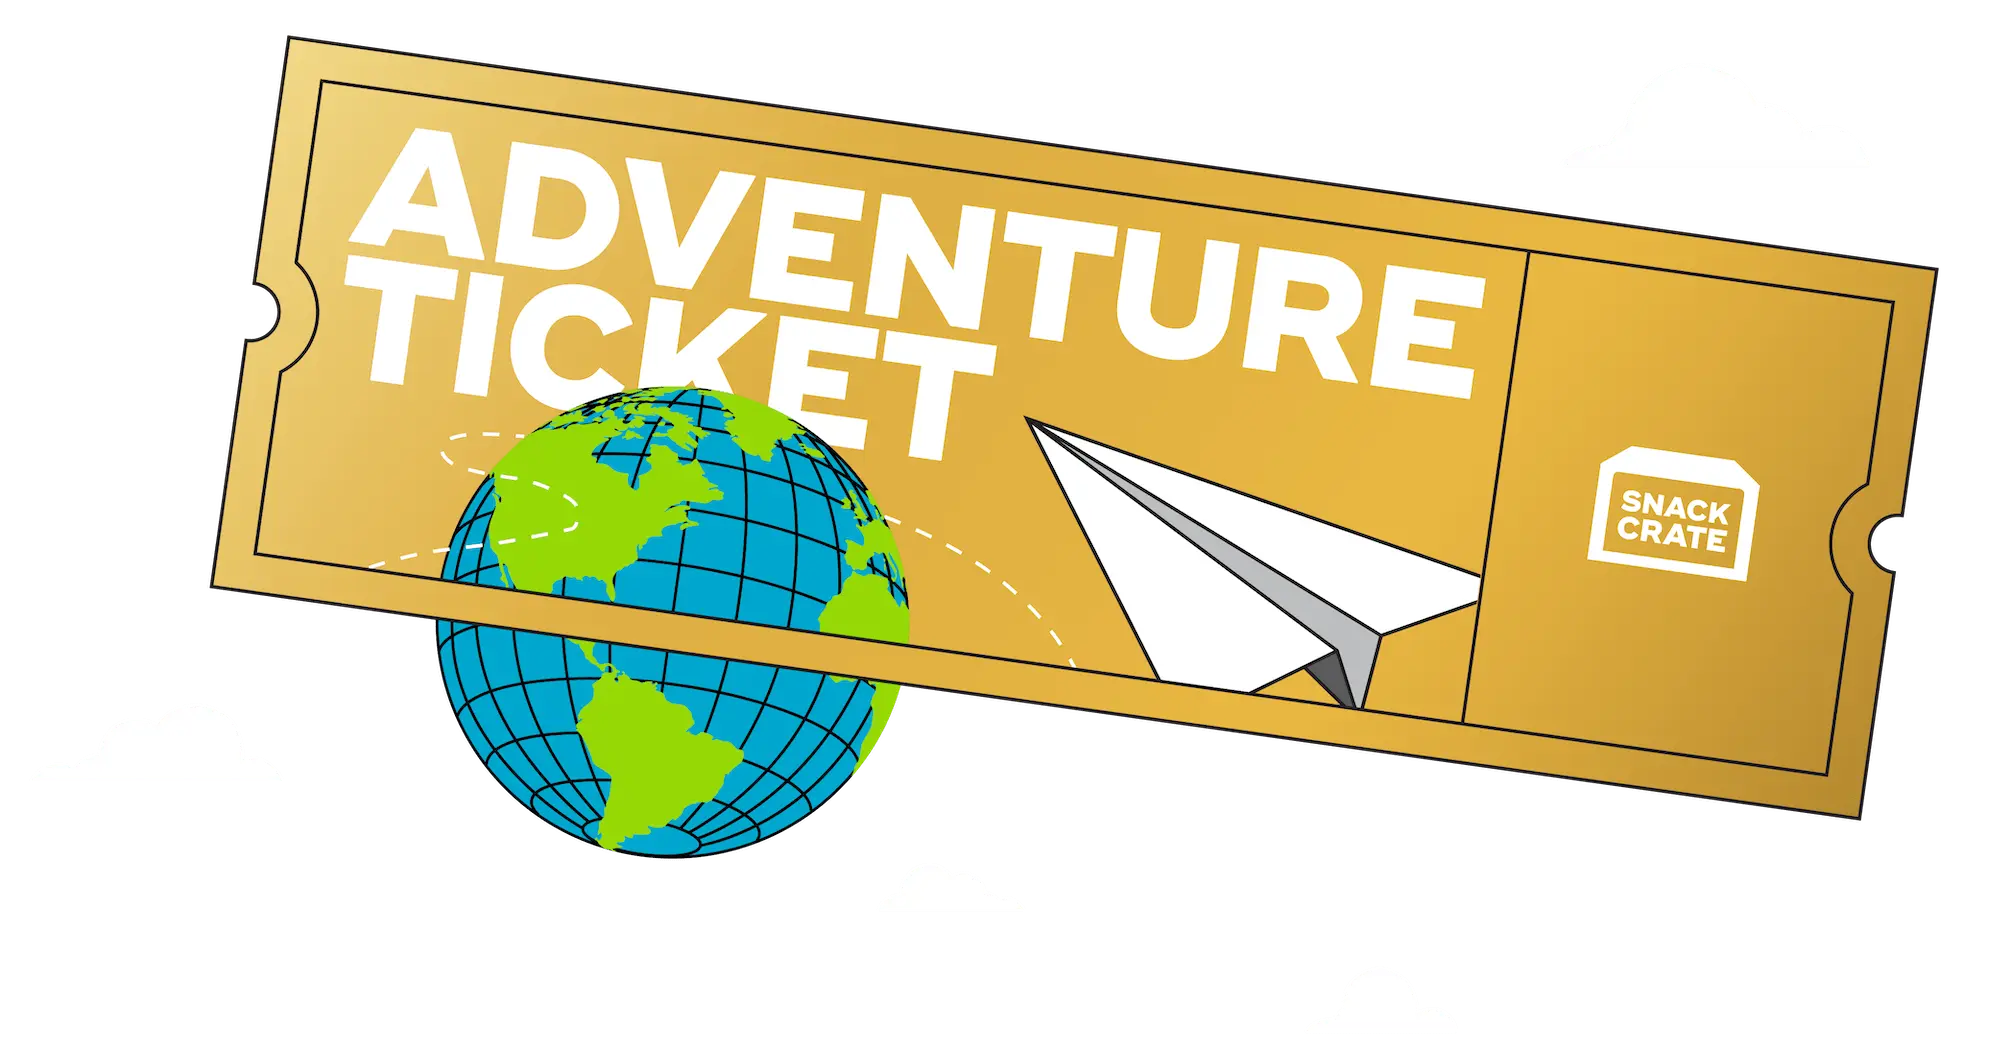 A golden SnackCrate Adventure Ticket surrounded by white clouds and a paper airplane circling around a globe.